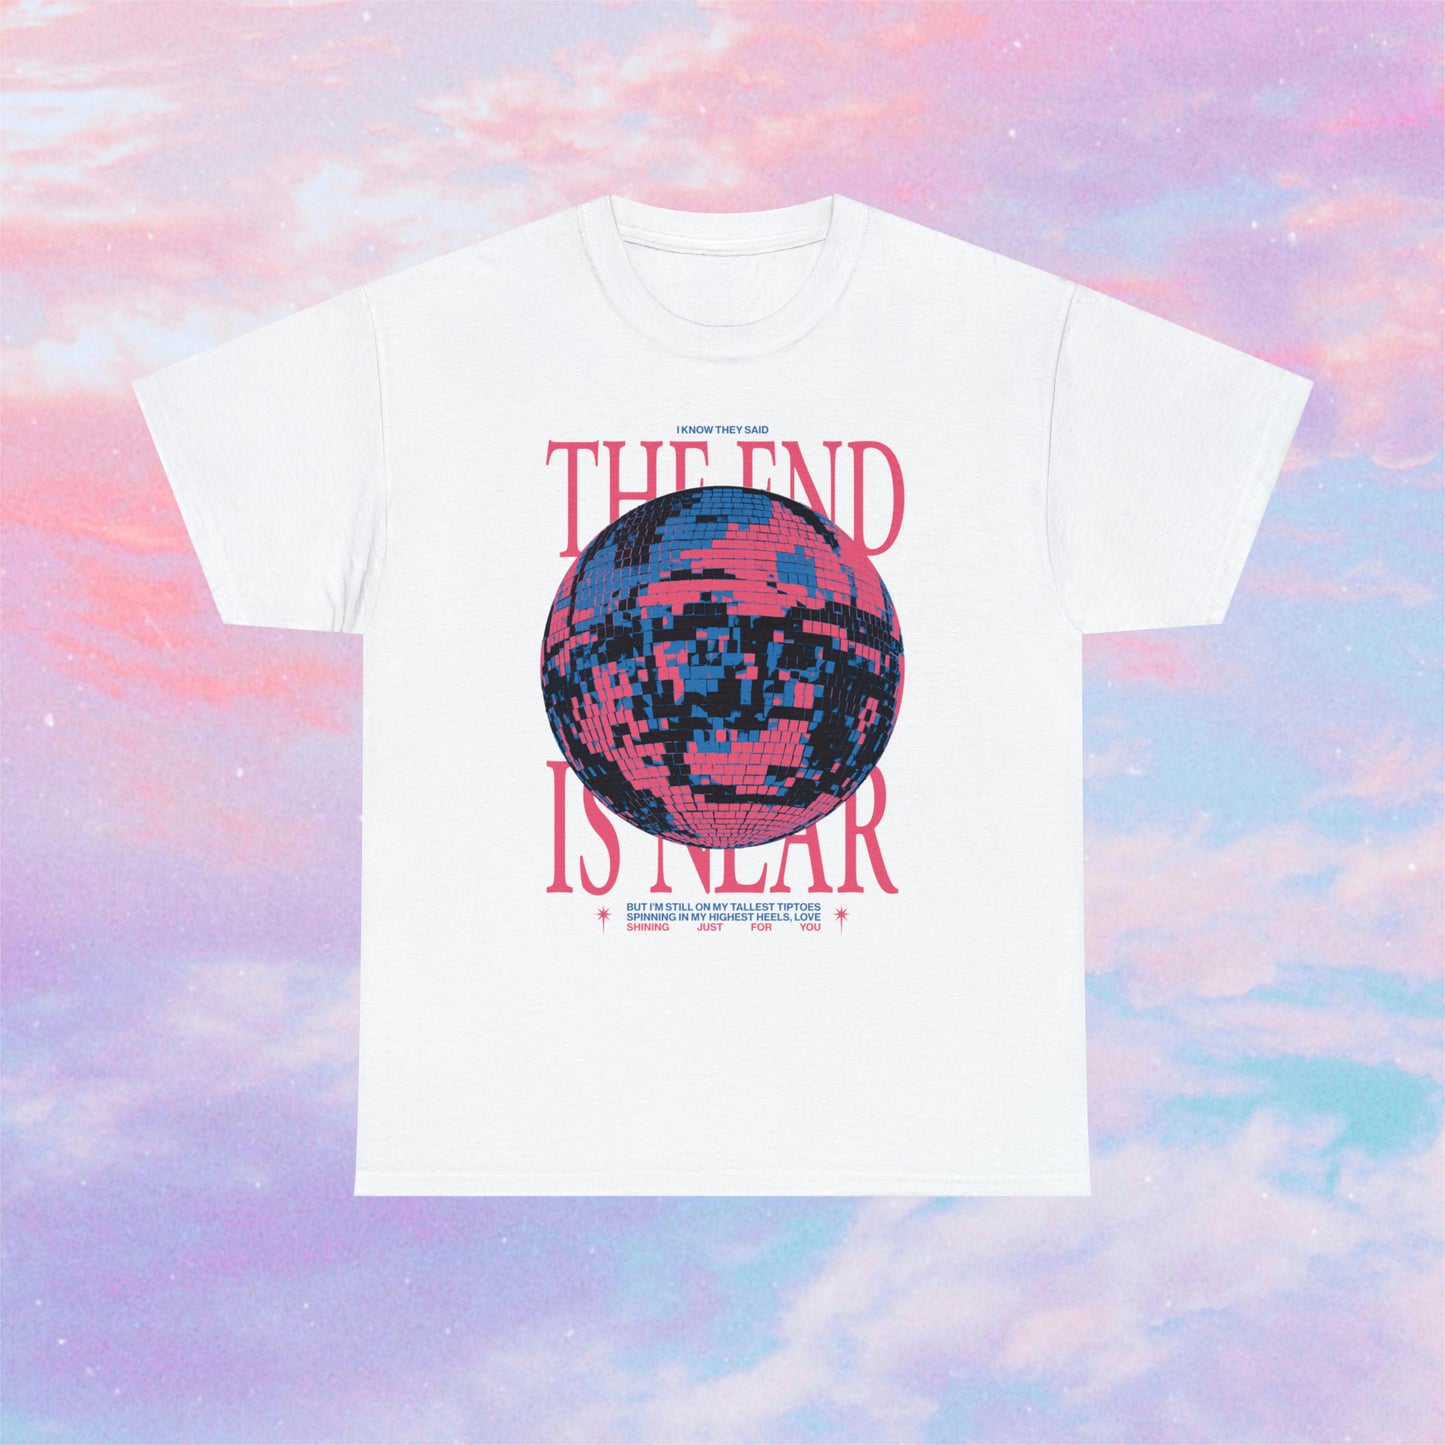 Mirrorball (The End Is Near) graphic tee